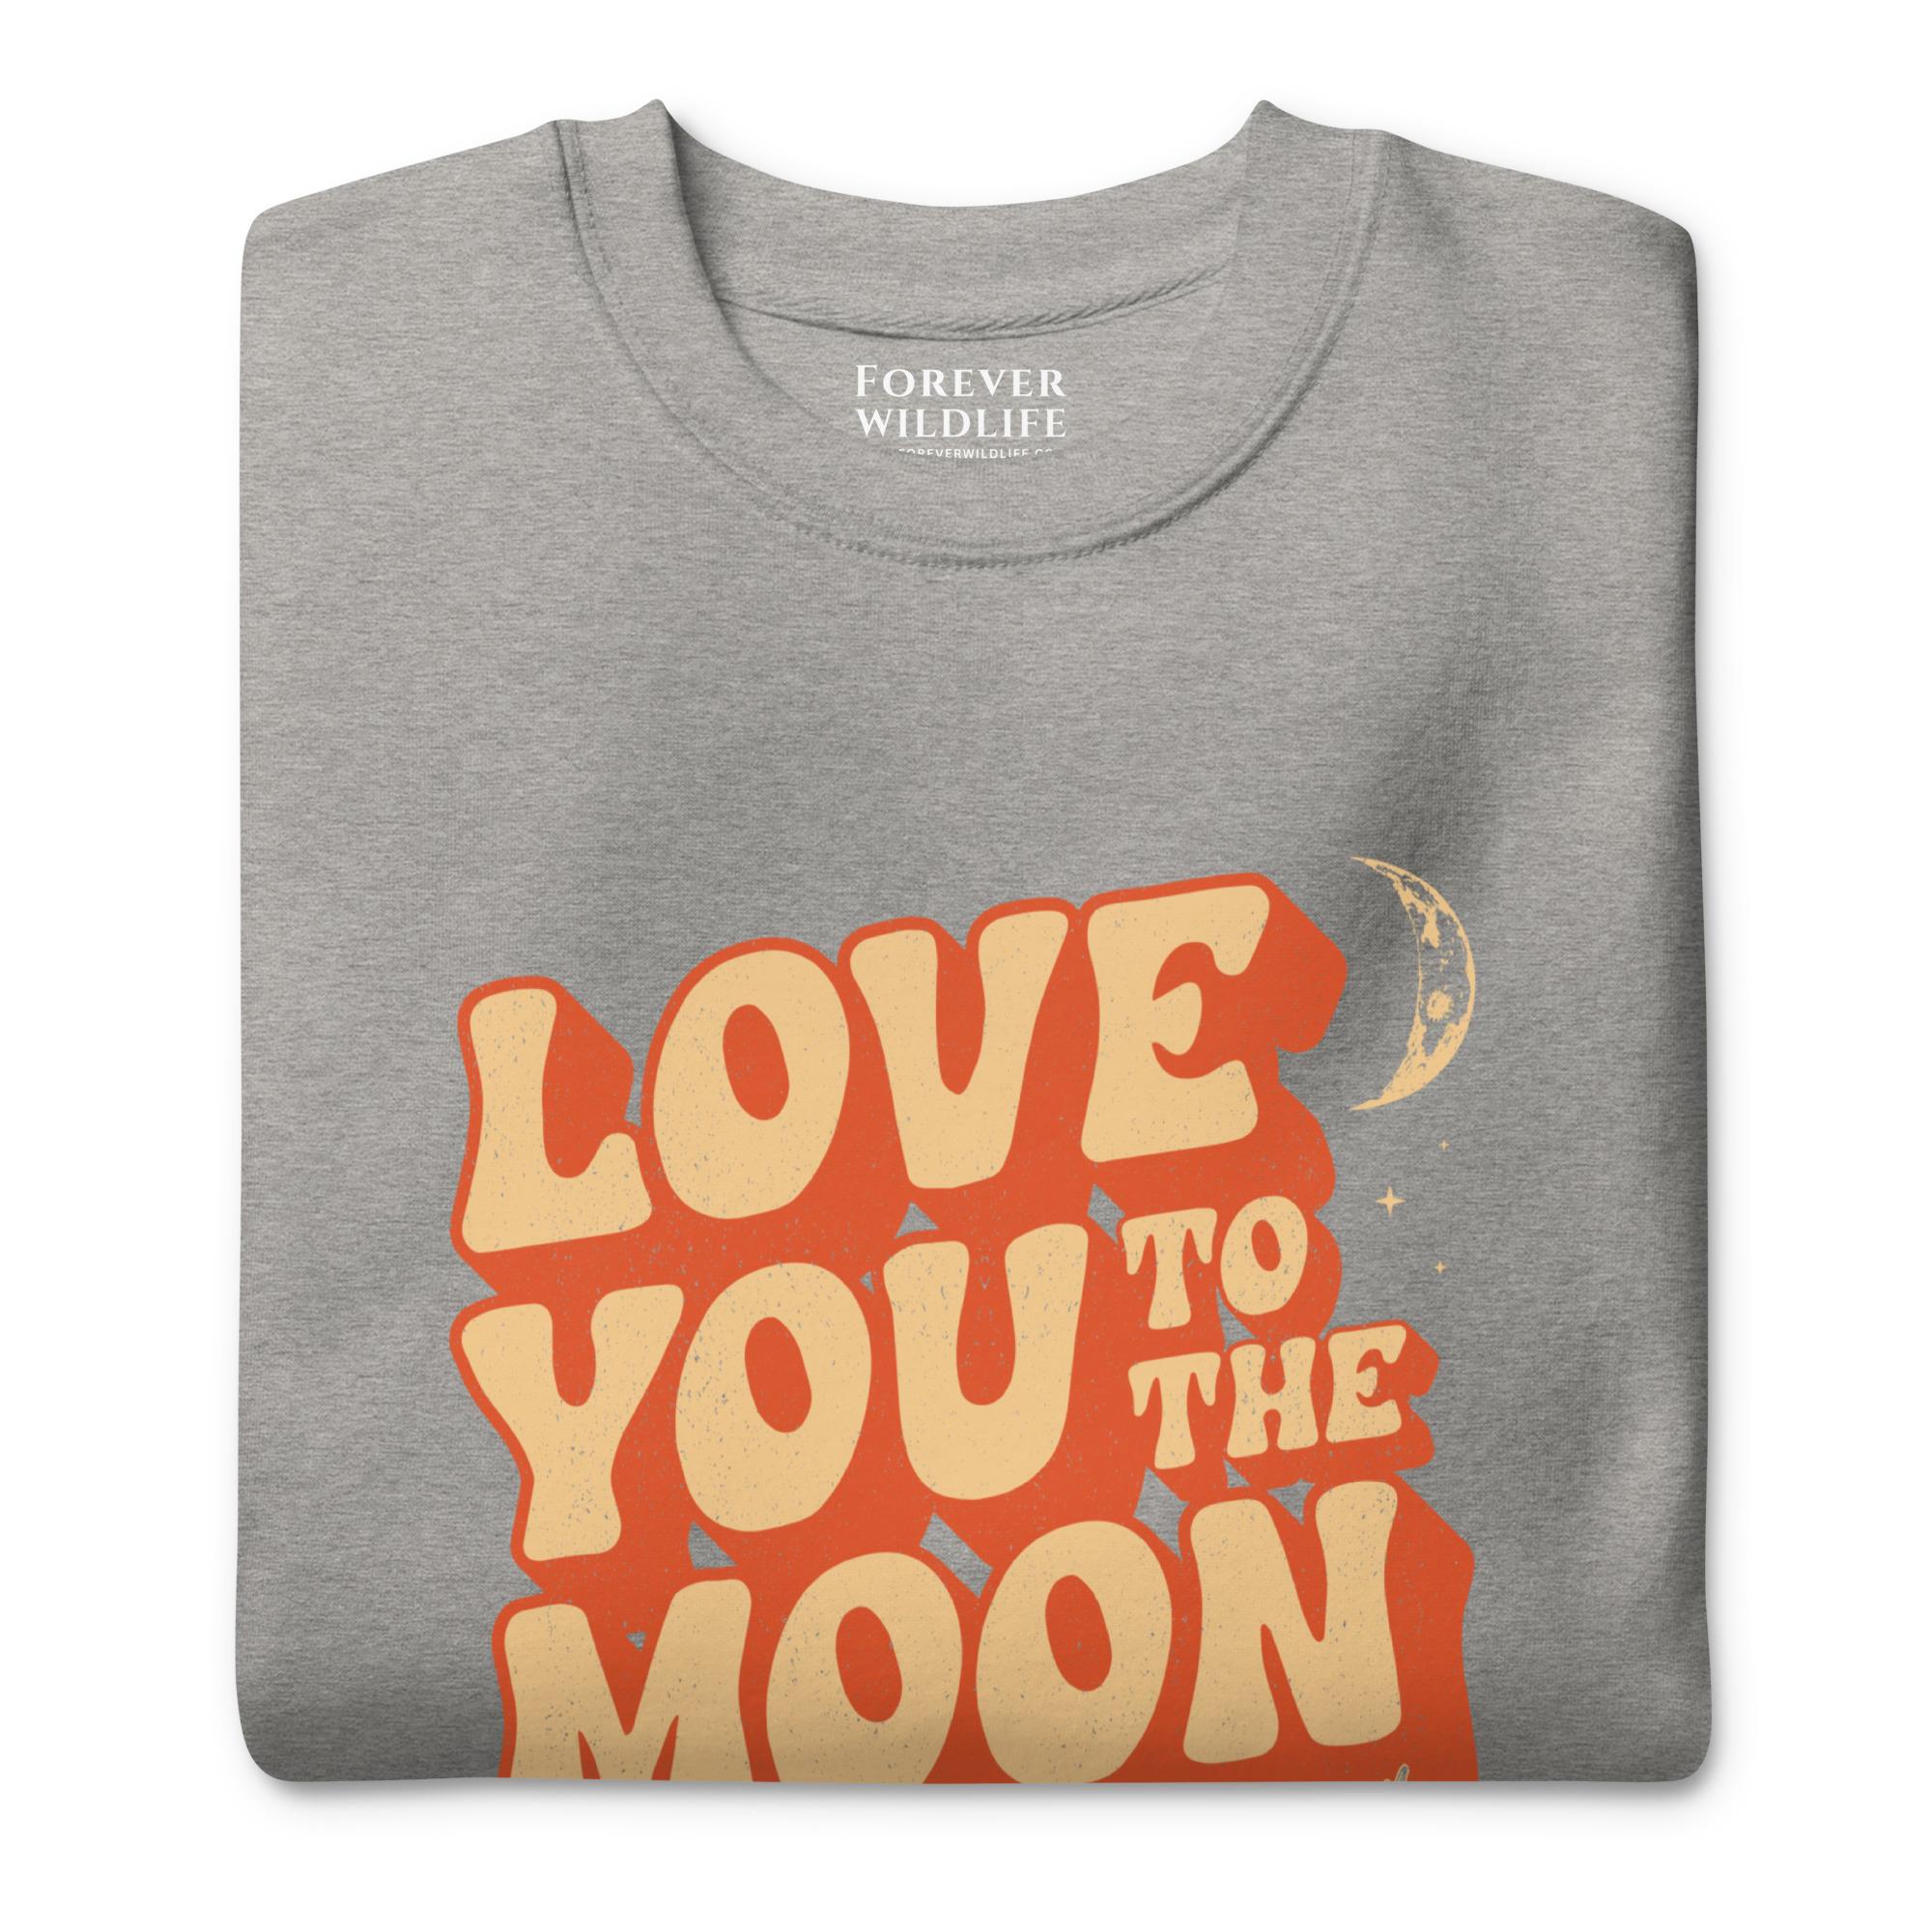 Eagle Sweatshirt in Grey-Premium Wildlife Animal Inspiration Sweatshirt Design with 'Love You To The Moon' text, part of Wildlife Sweatshirts & Clothing from Forever Wildlife.